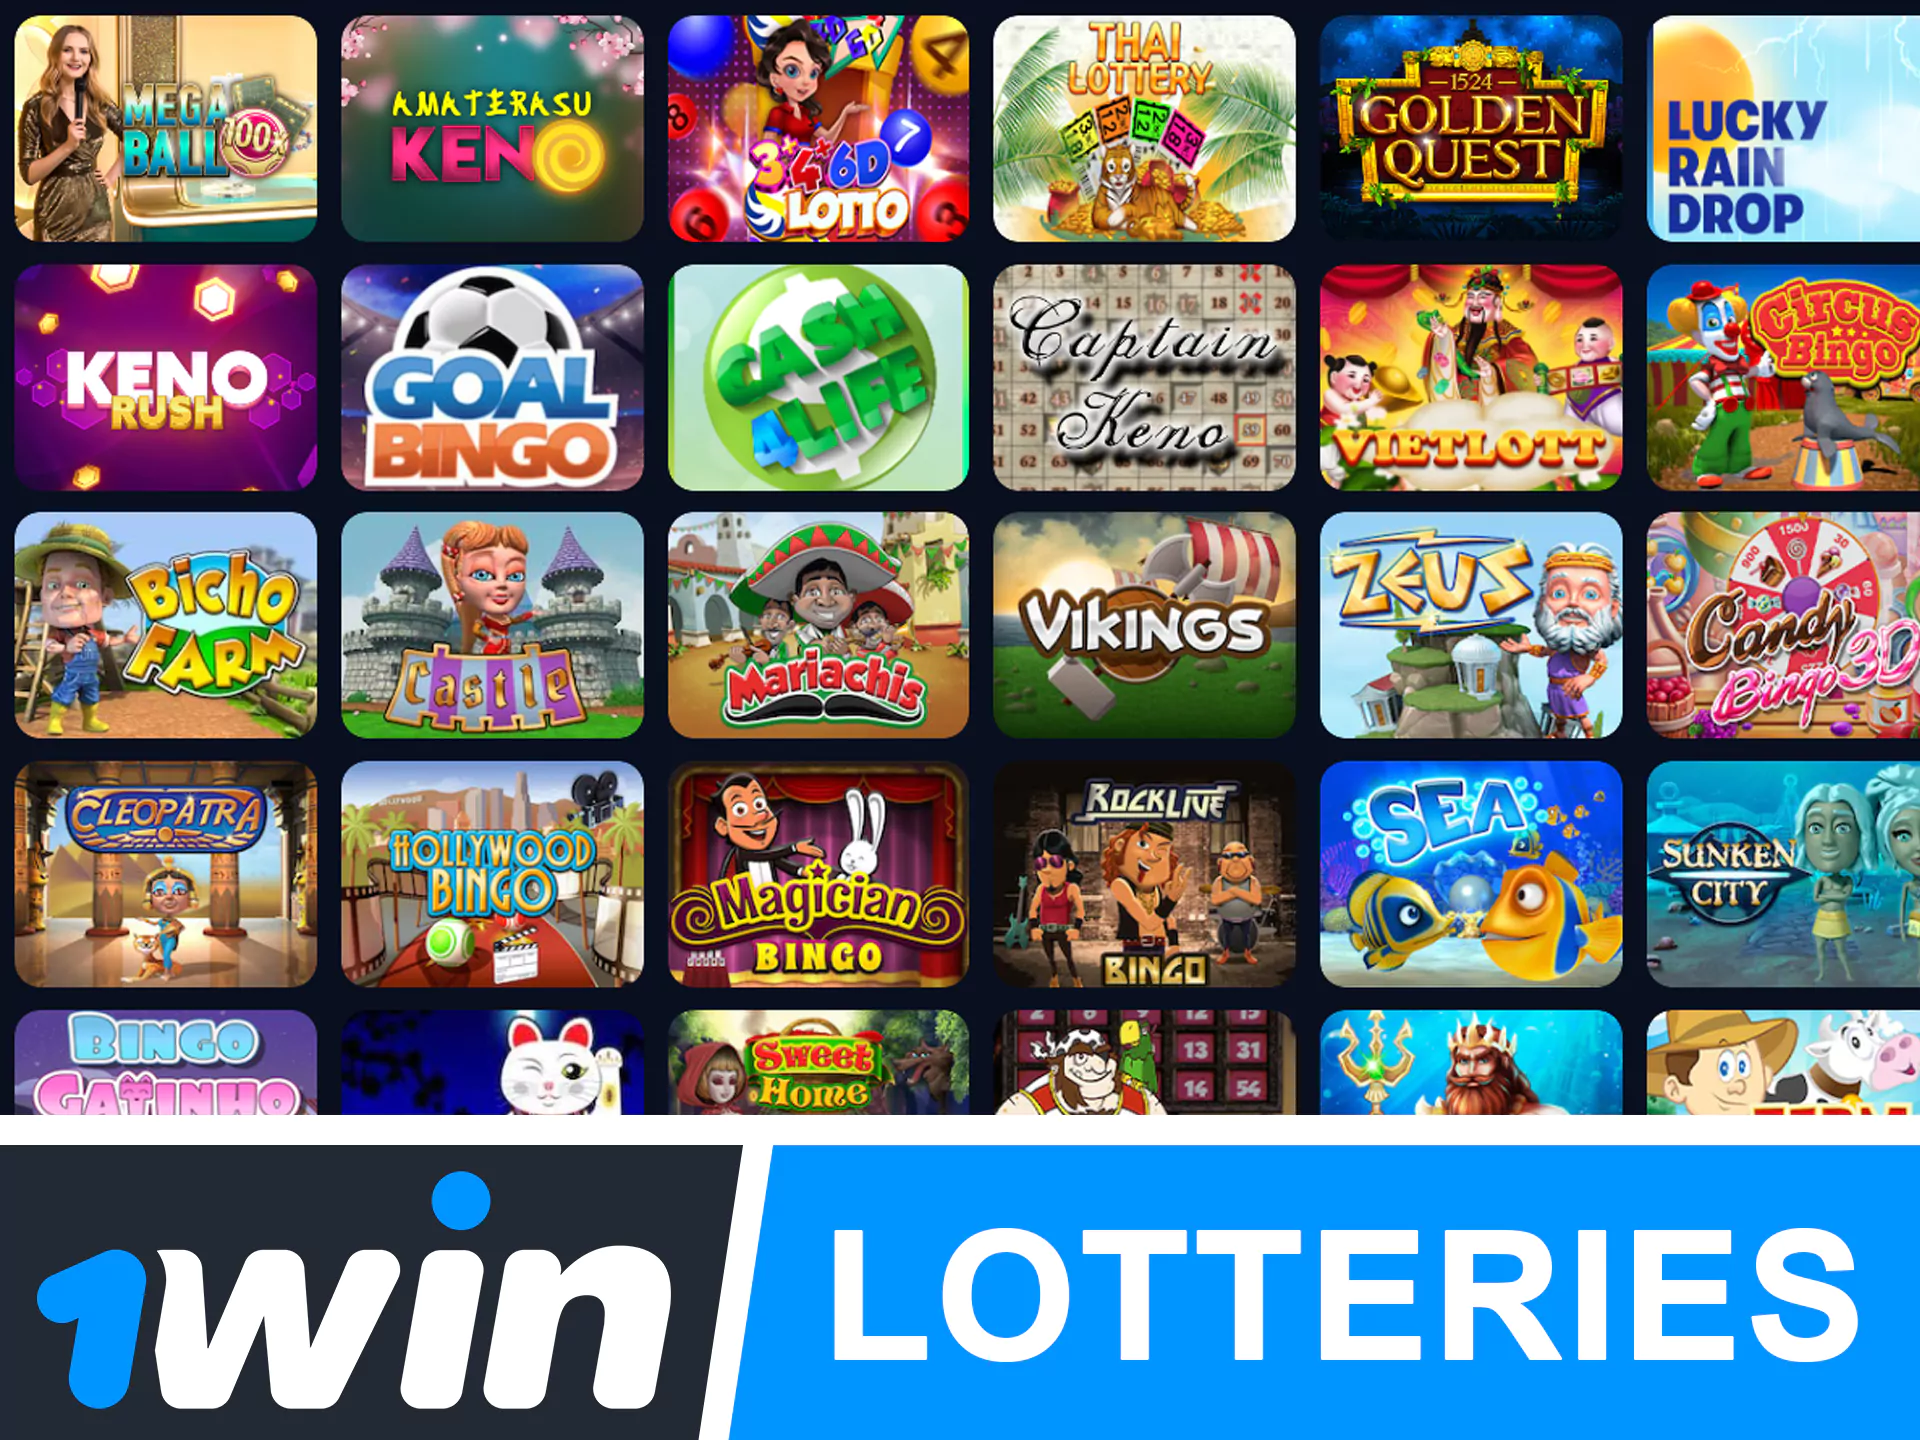 You can play various lotteries at 1win.